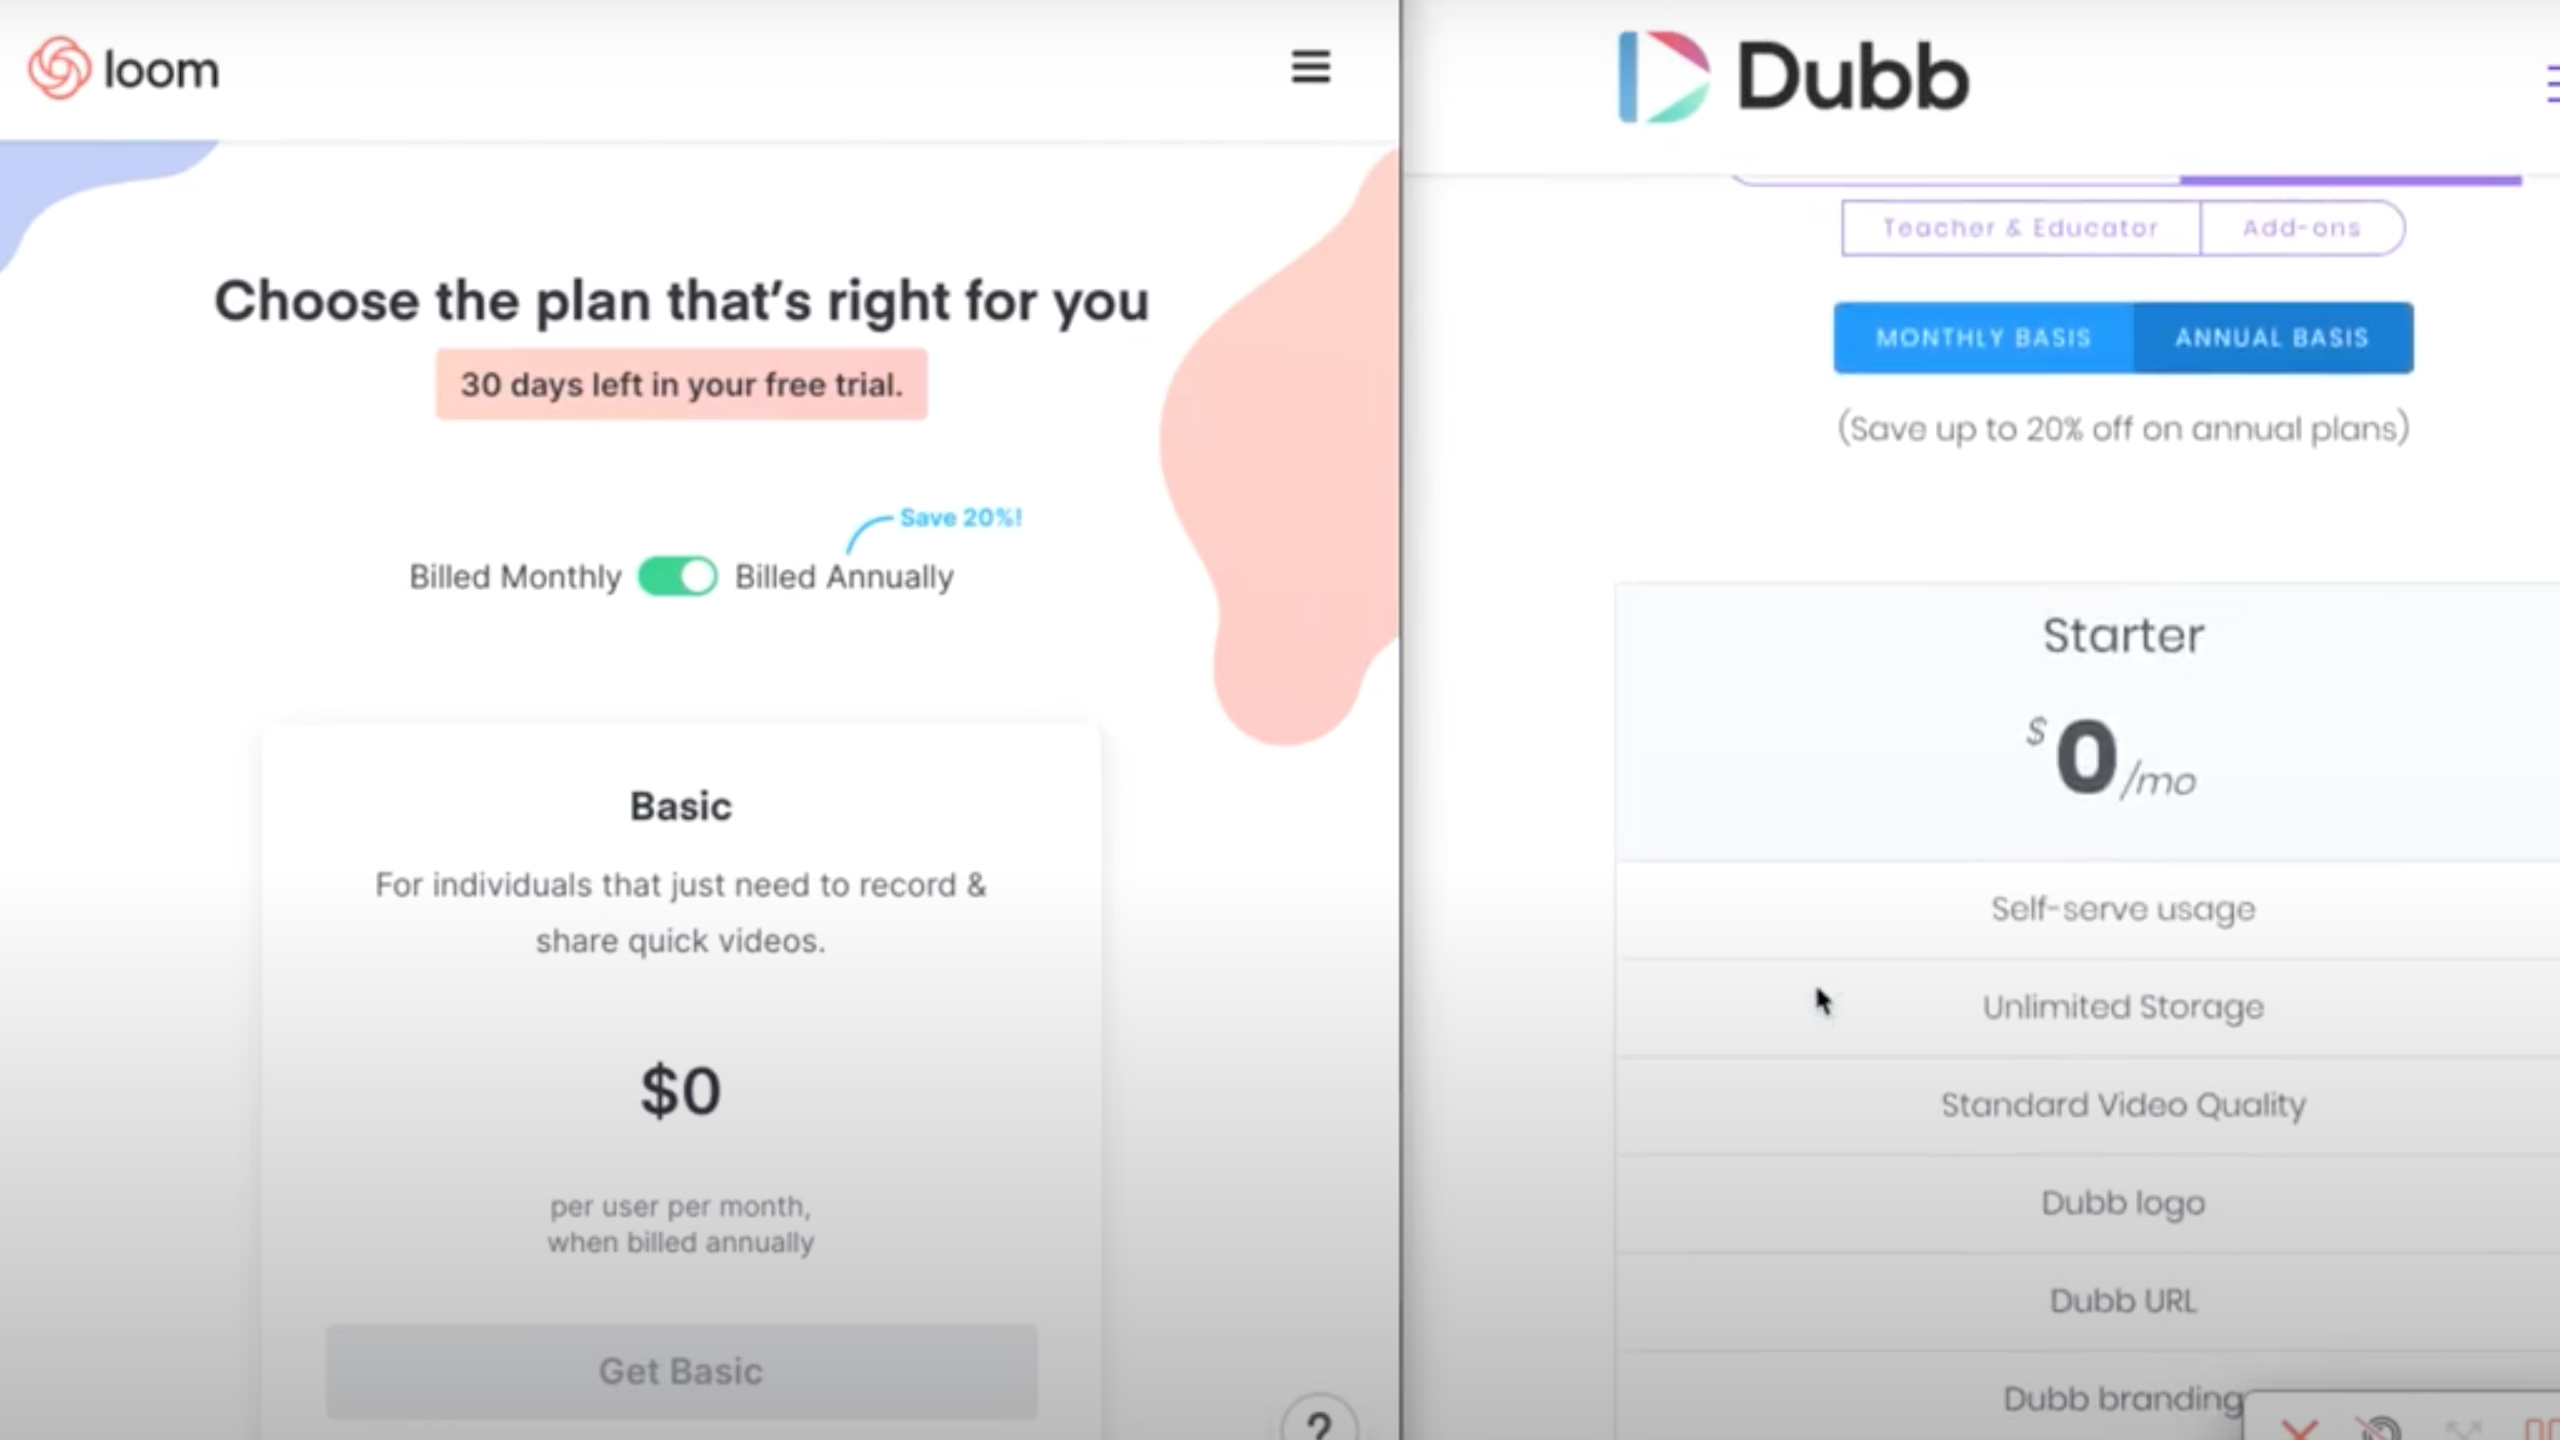 Loom Pricing compared to Dubb Pricing